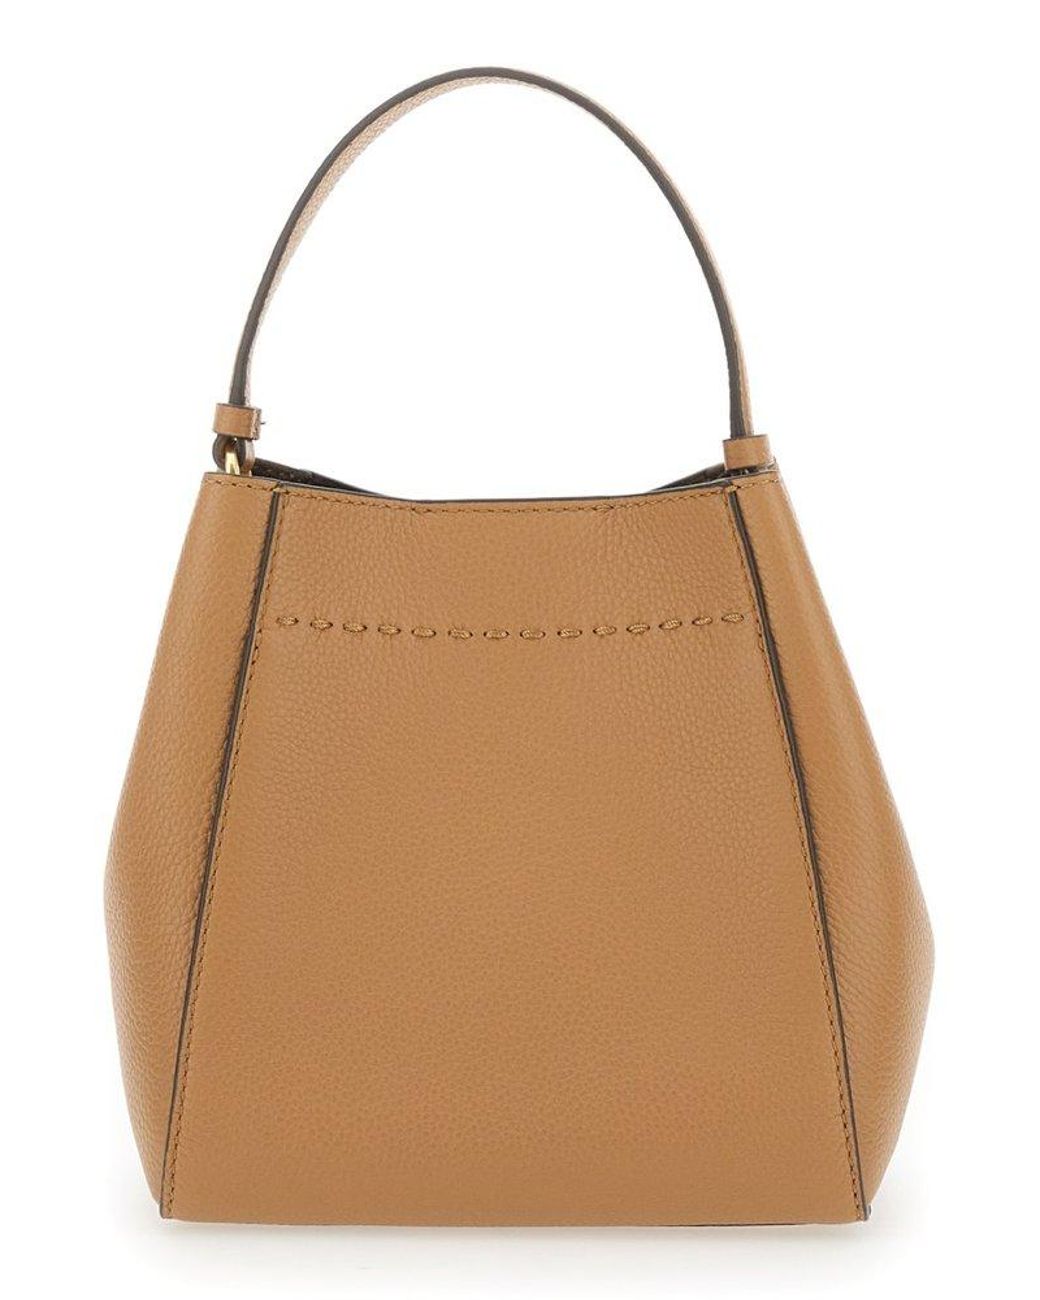 Tory Burch Mcgraw Small Bucket Bag in Brown | Lyst